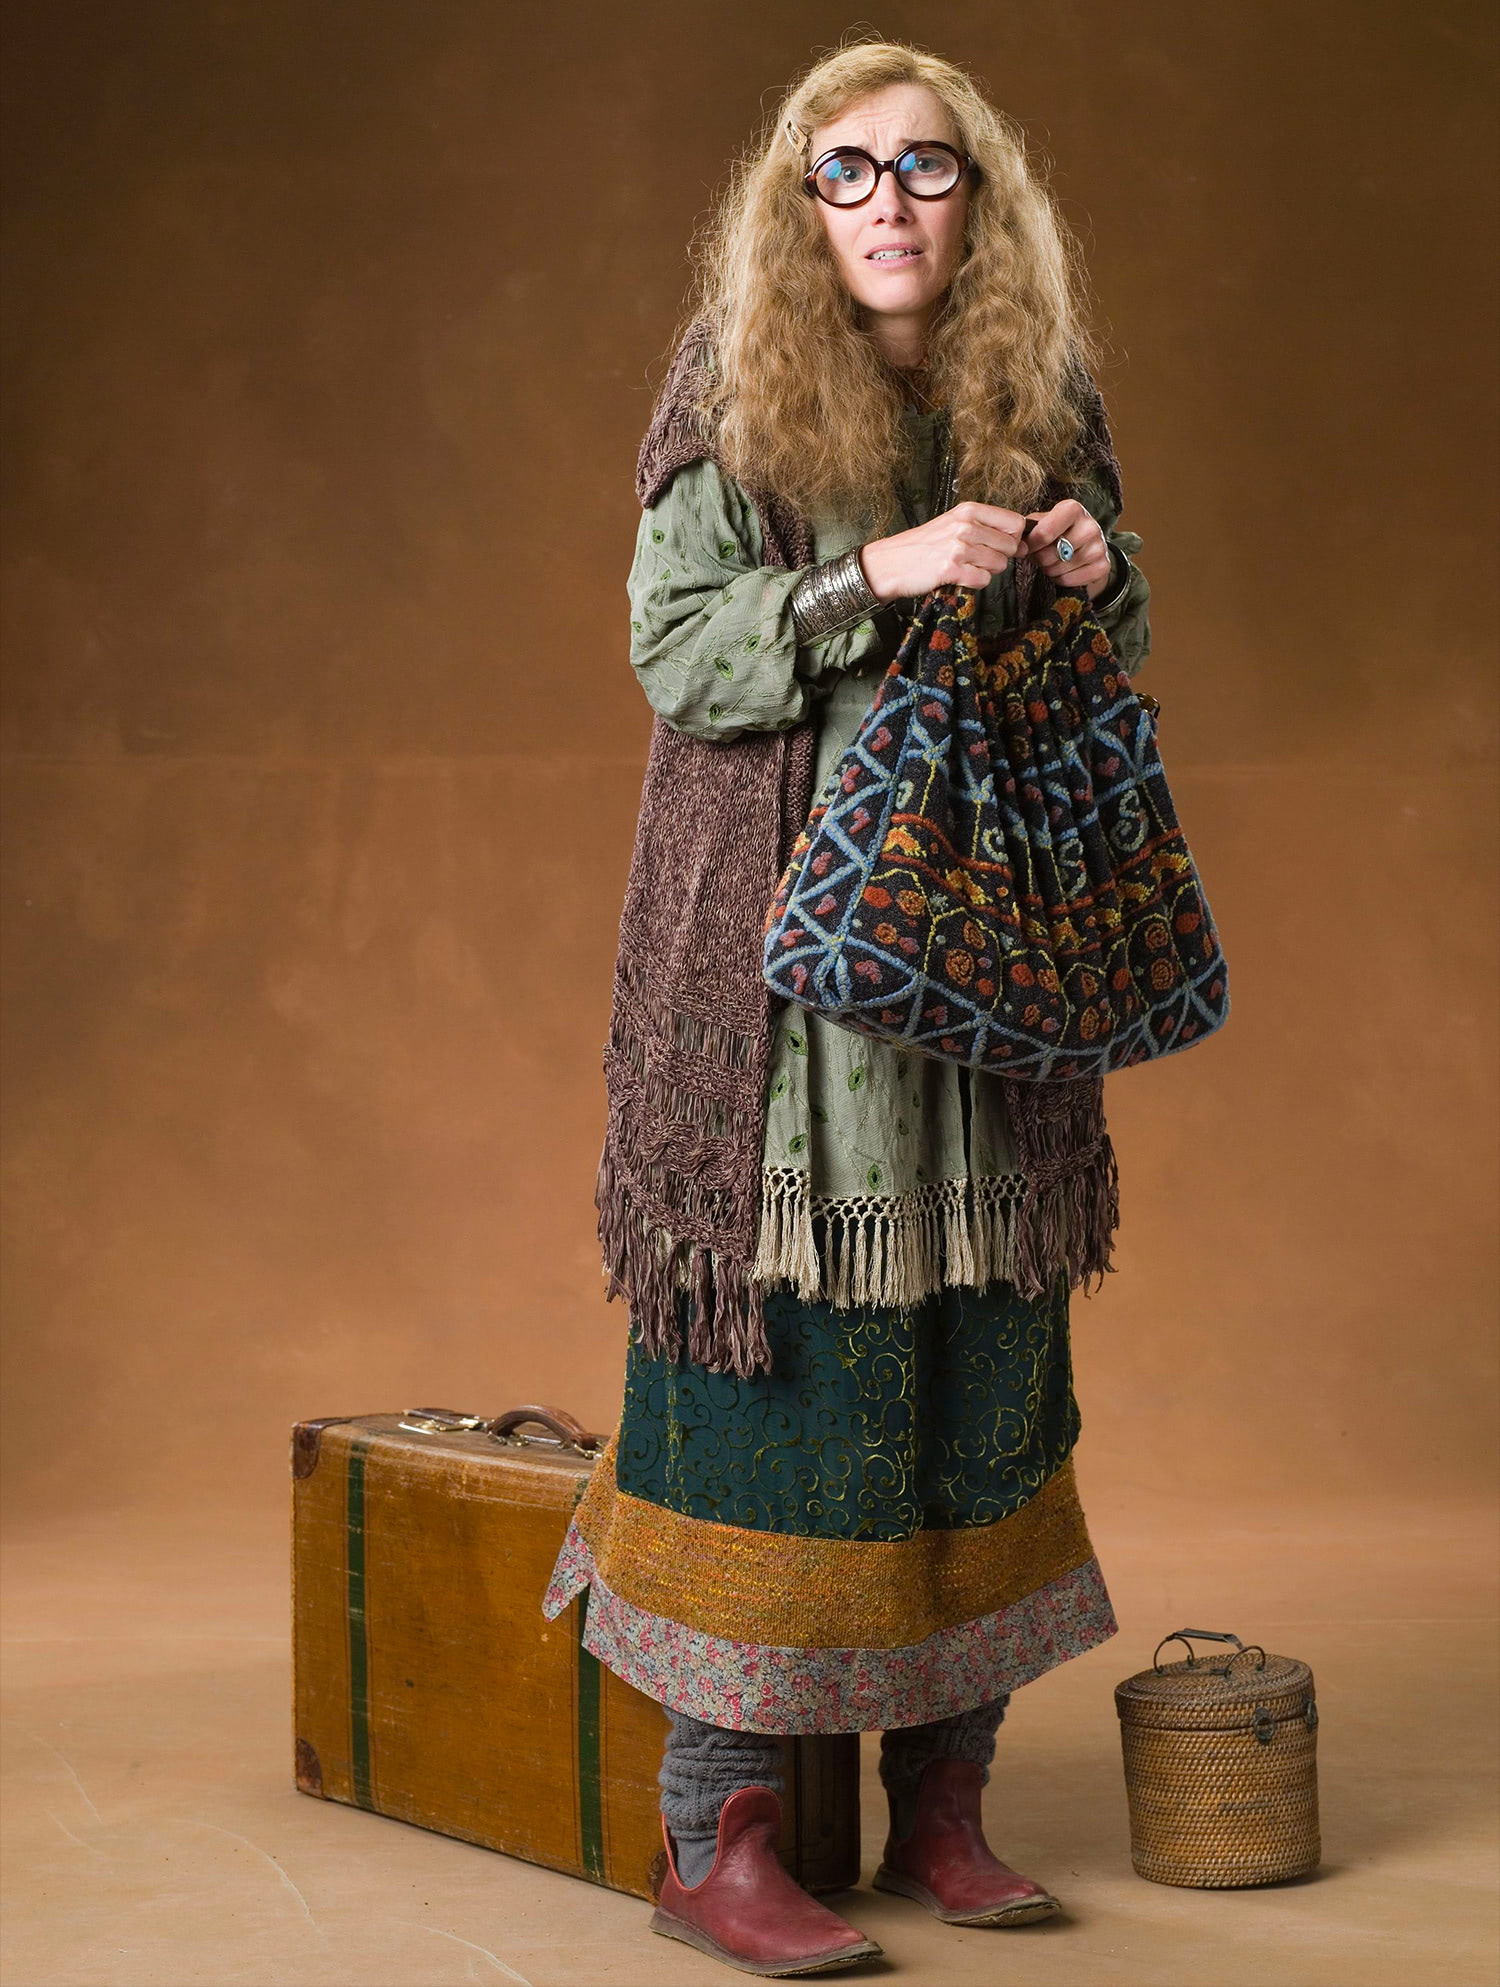 Sybill Trelawney' pictures.